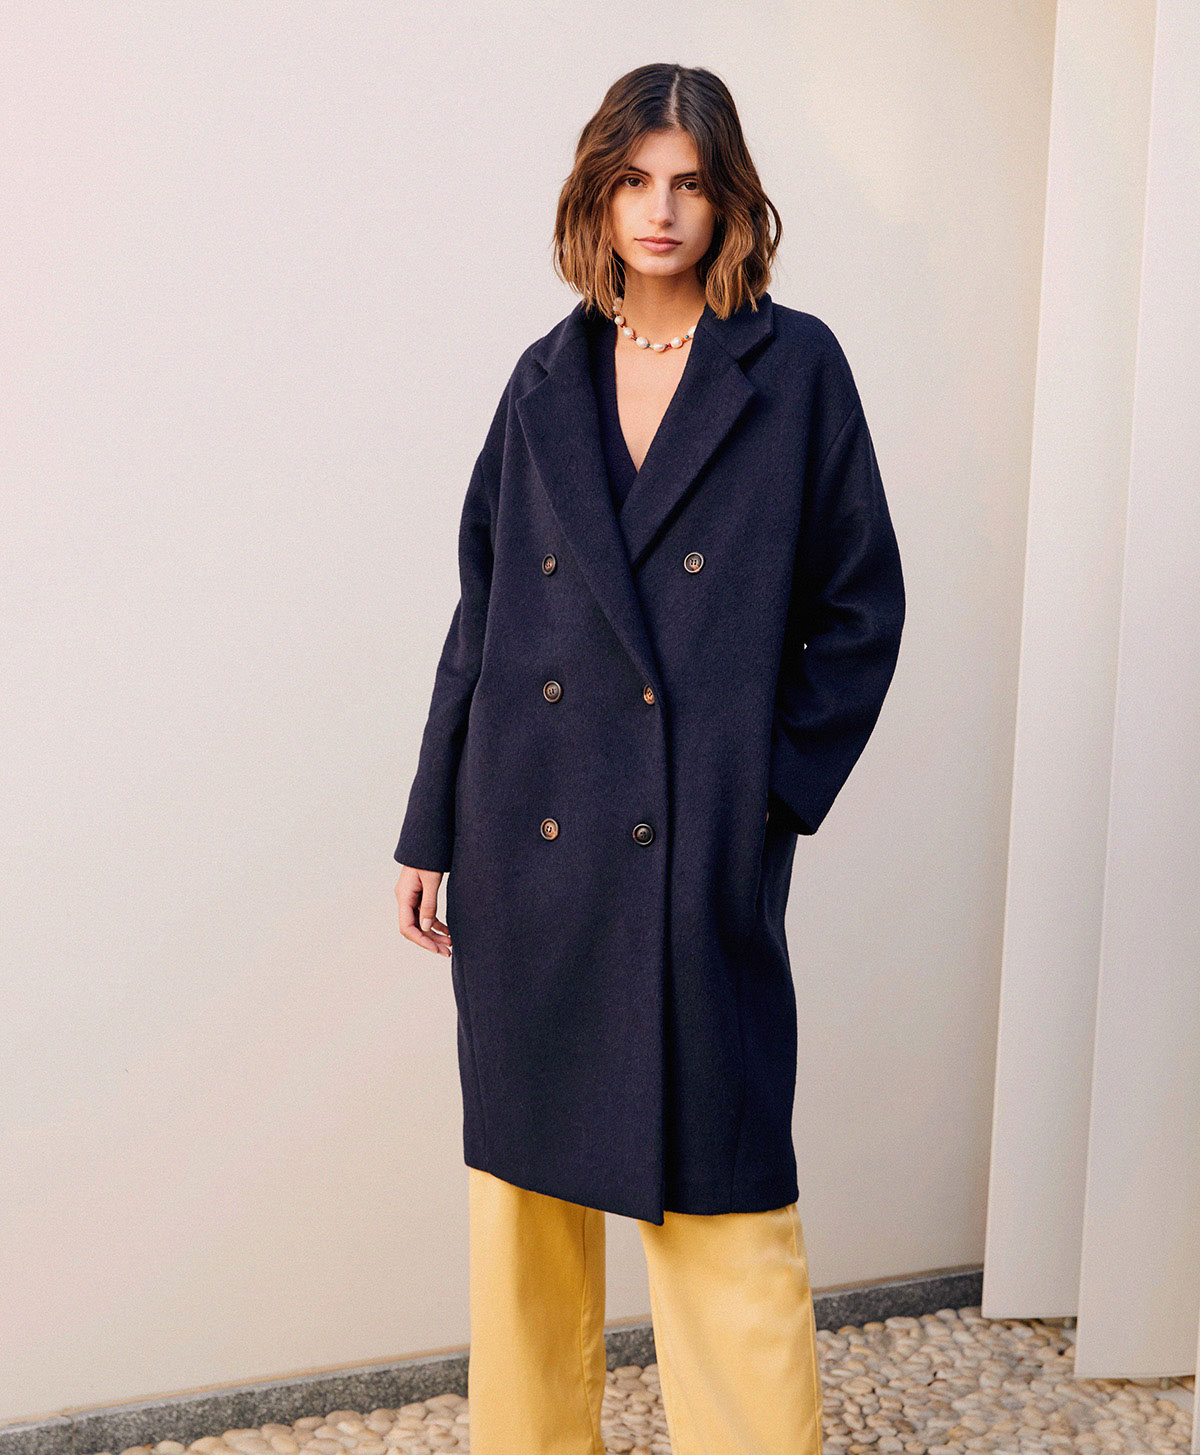 NEVE COAT IN DOUBLE-FACE WOOL CLOTH - BLUE/CAMEL - Momonì